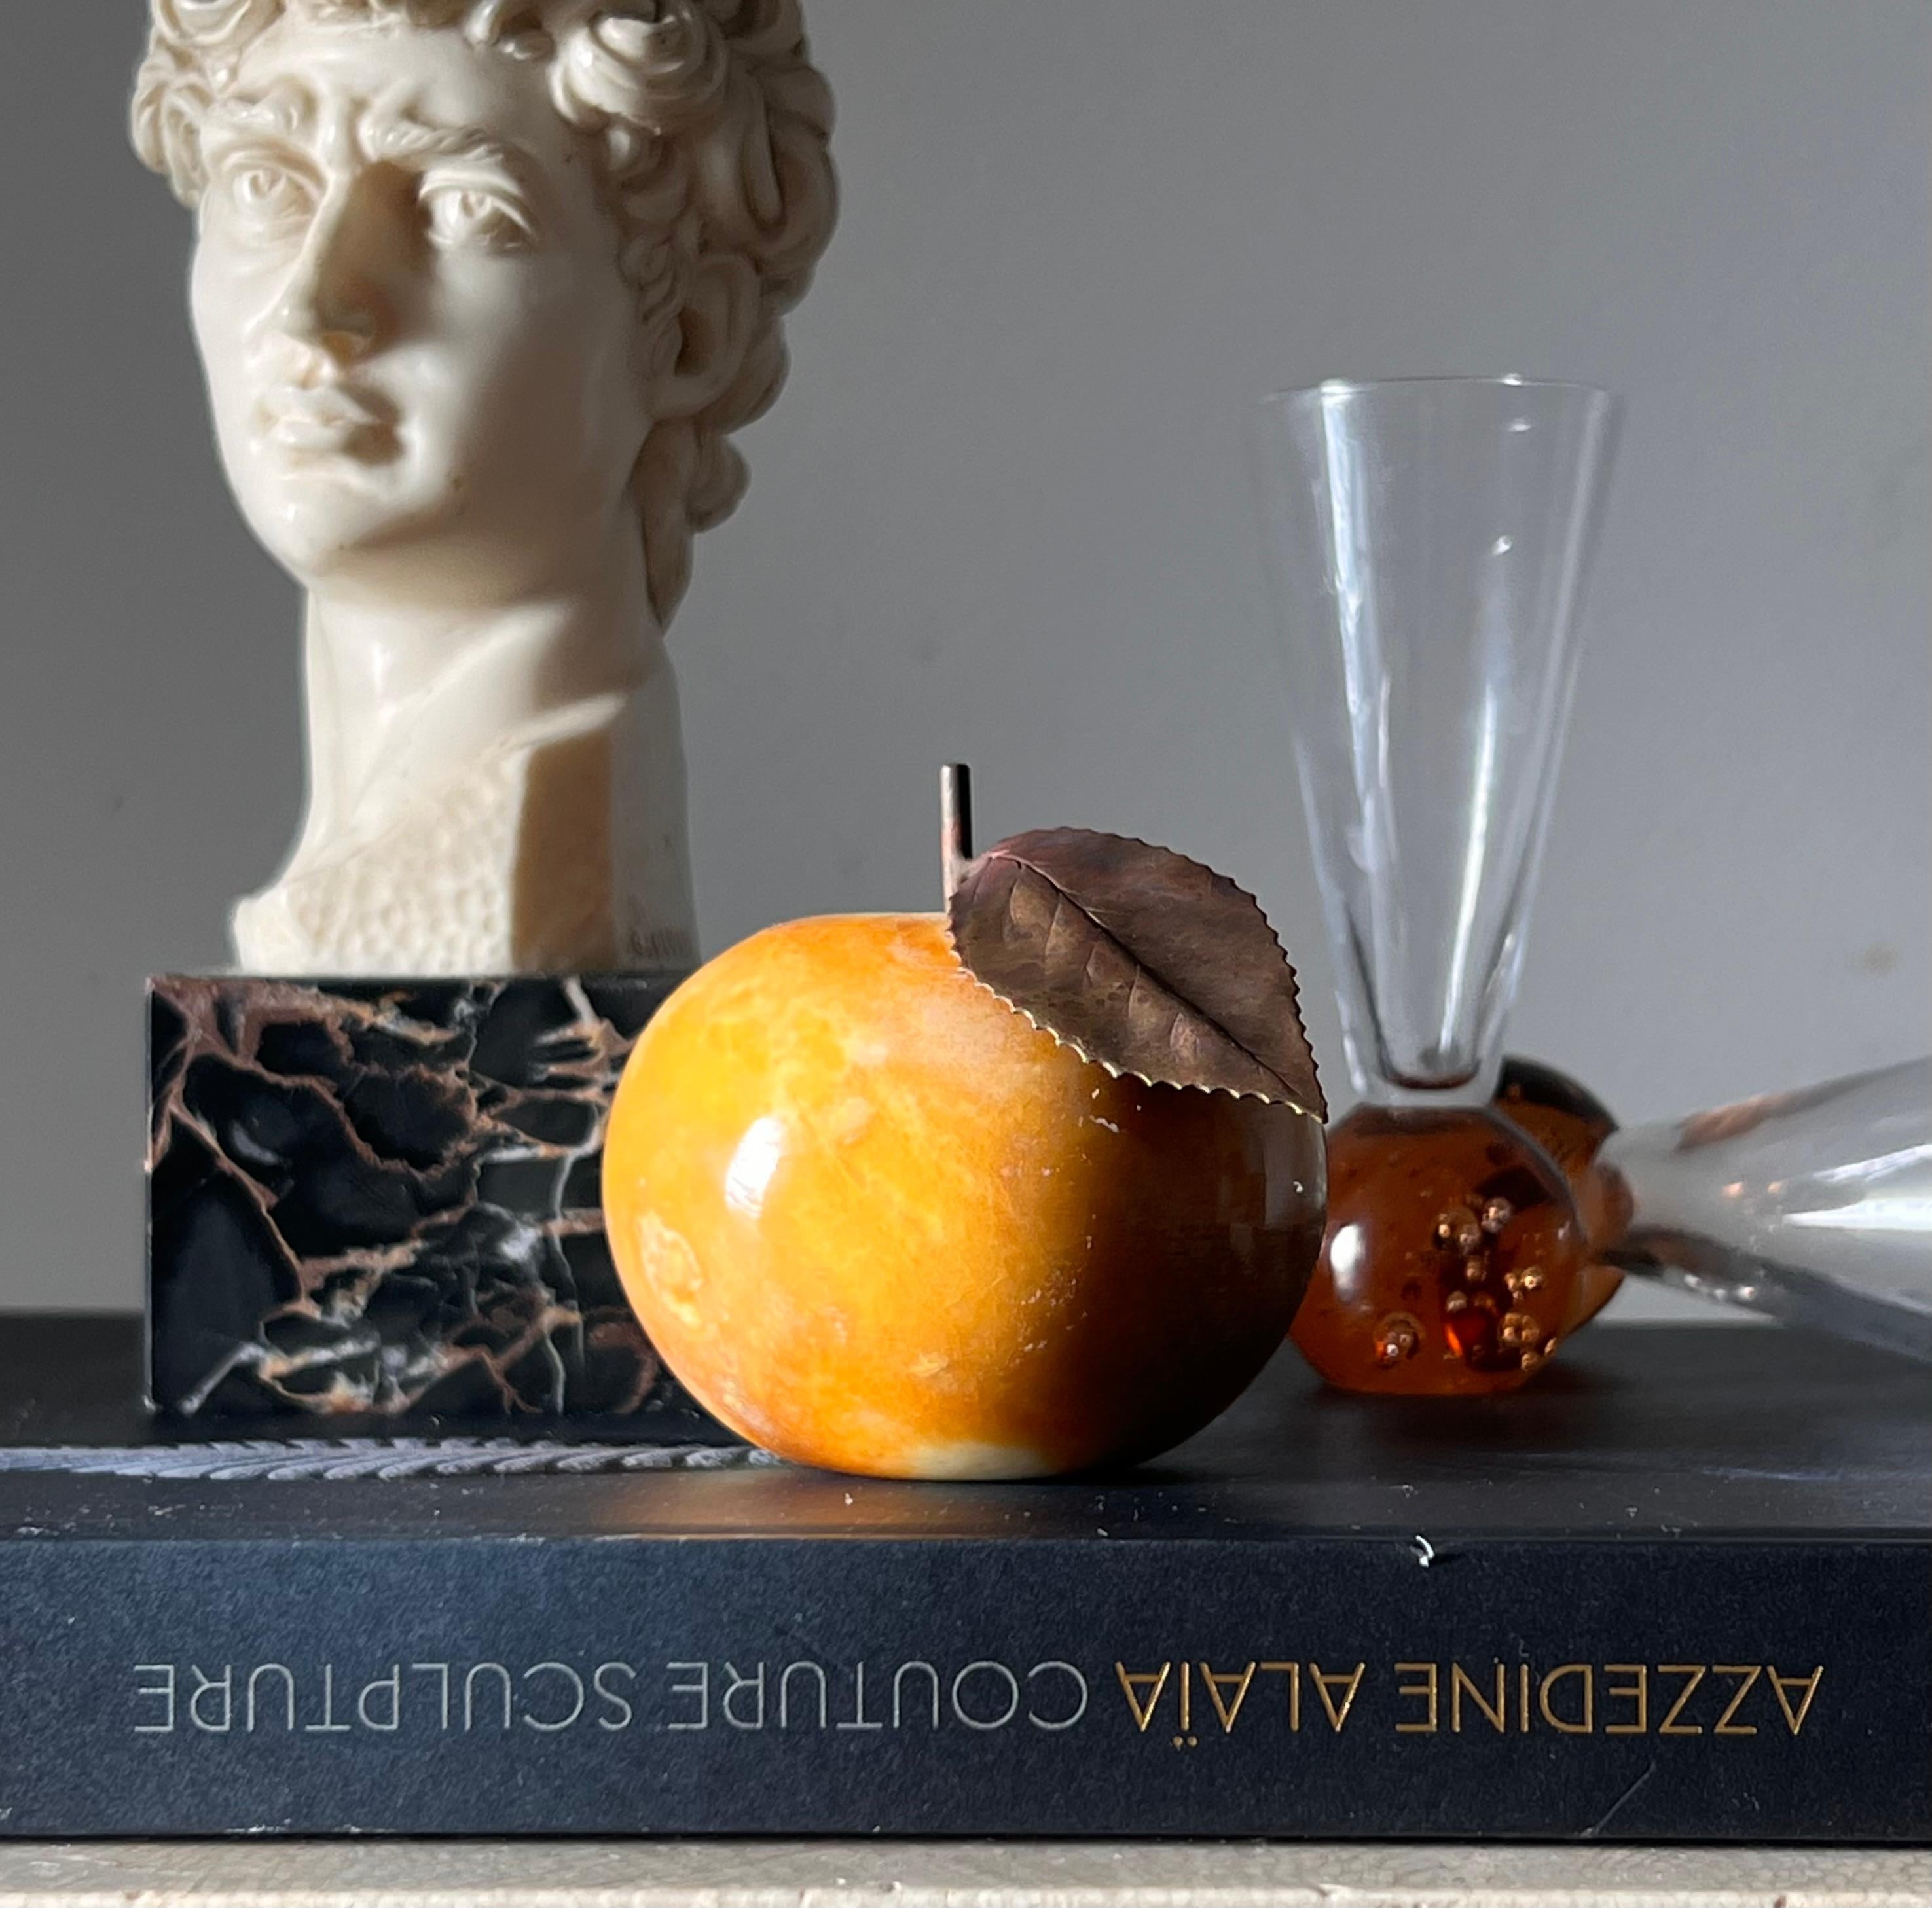 A very fine vintage Italian volterra alabaster marble “pomme d’or” apple with bronze stem, by Ducceschi, hand-carved in Italy circa late 1960s. The apple itself is a fine golden caramel tone with tinges of rouge, while the bronze leaf is expertly